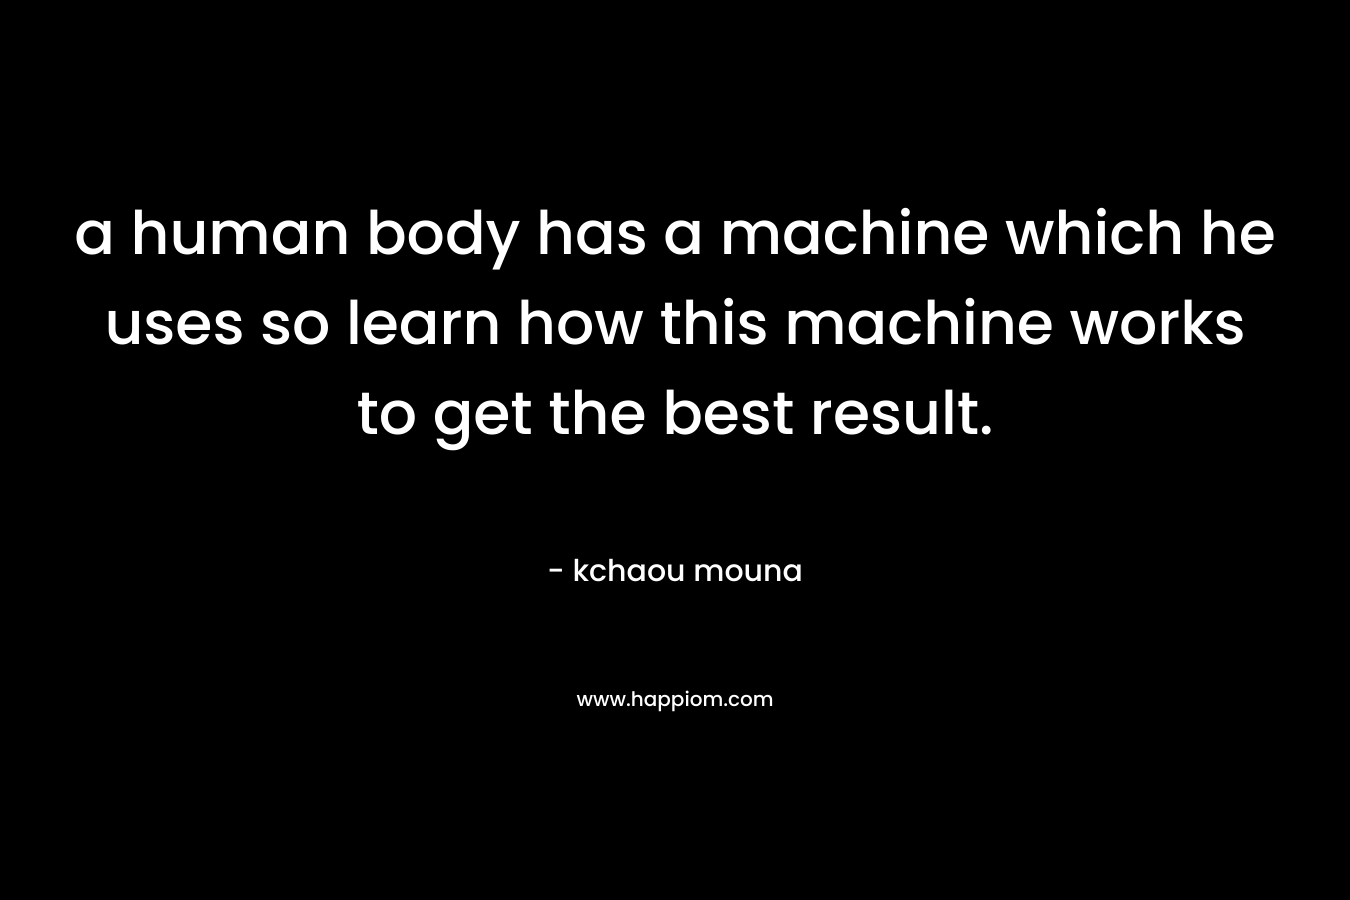 a human body has a machine which he uses so learn how this machine works to get the best result.